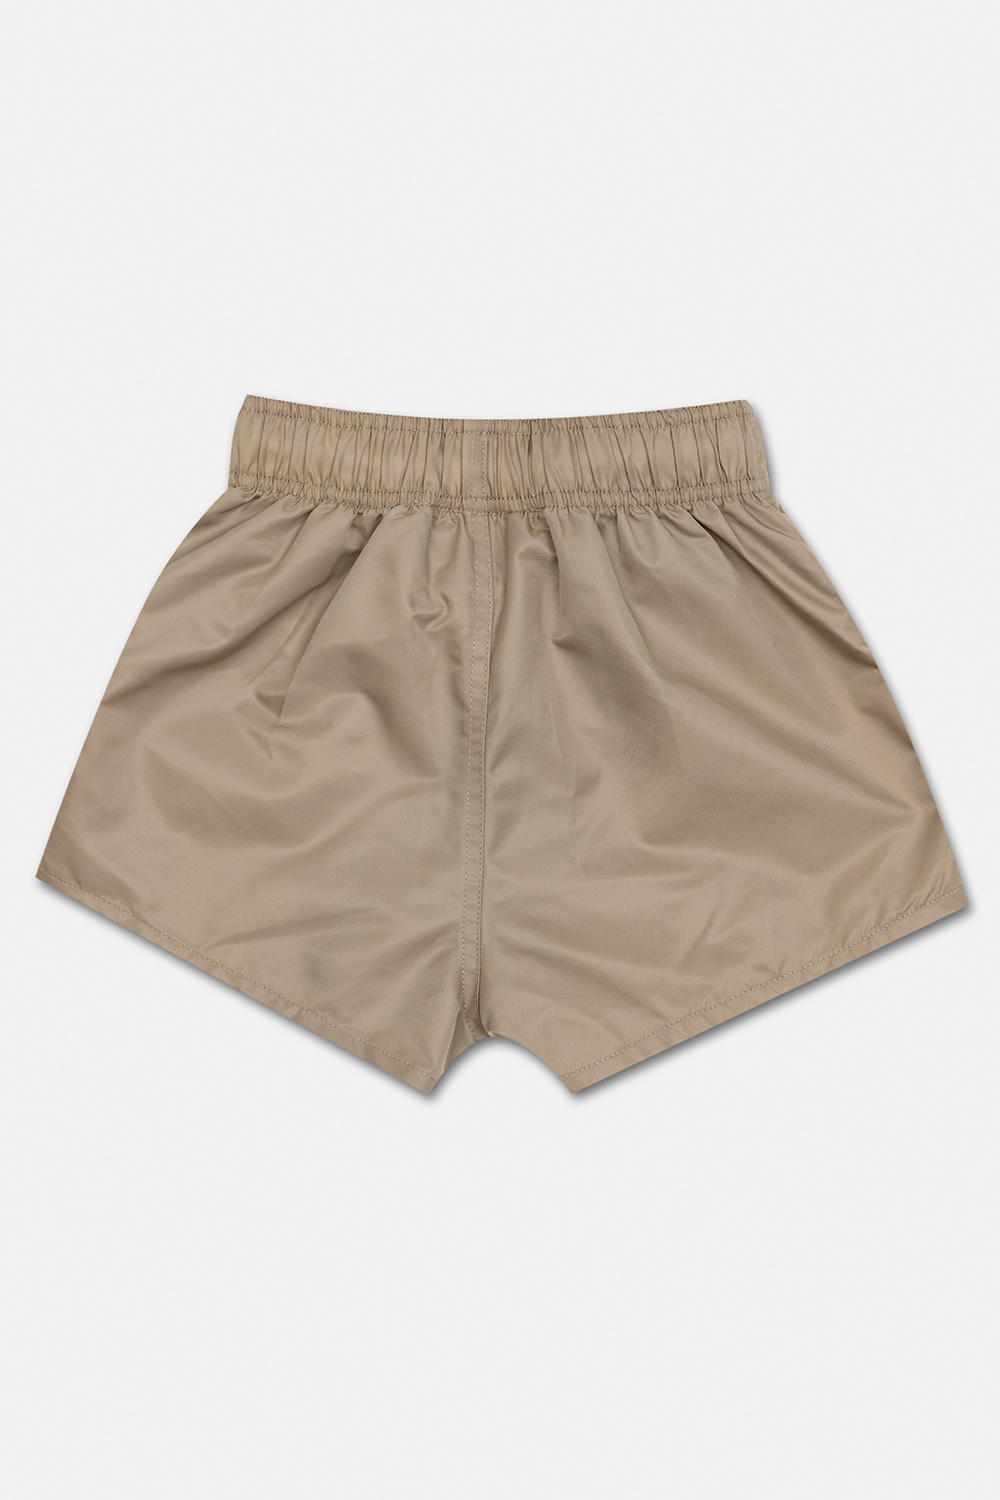 | Fear Shorts | with sand Kids\'s (4 alpha shorts Of logo clothes 14 | crew industries IetpShops - Girls Essentials Kids God years)